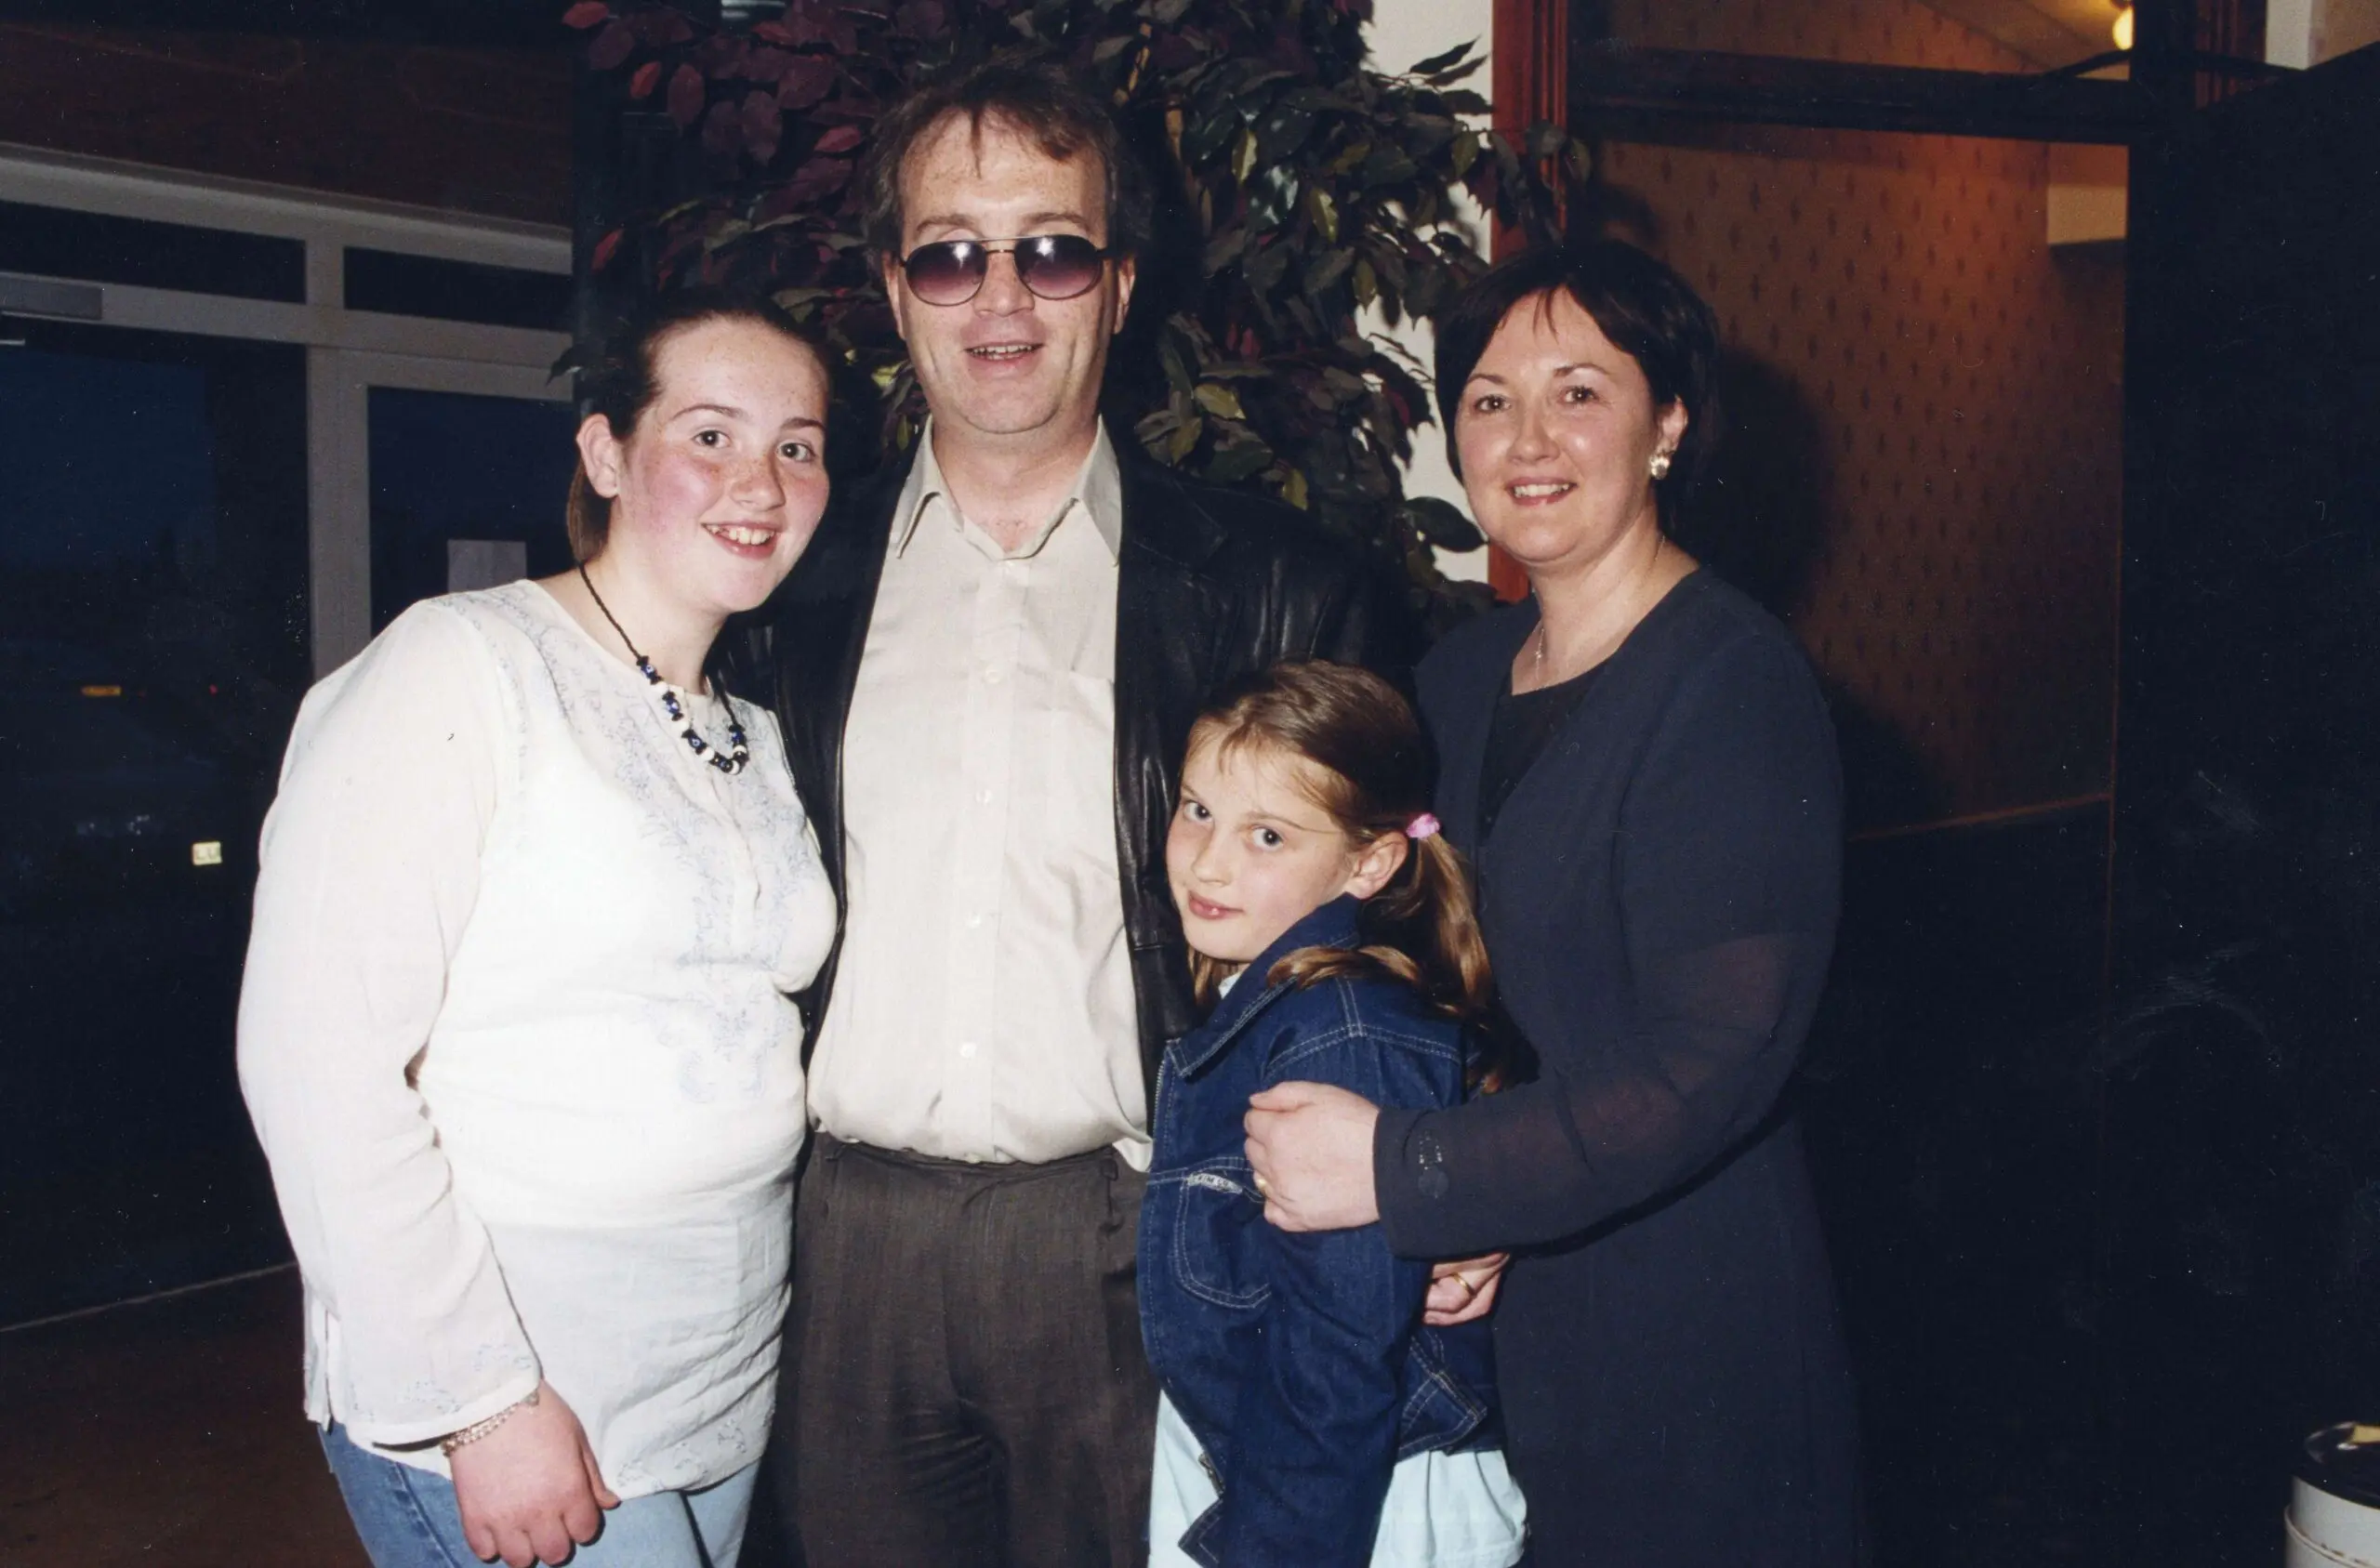 Moore with his wife, Rita, and their daughters, Naoimh and Enya, at his 40th birthday party in Derry, July 2001.